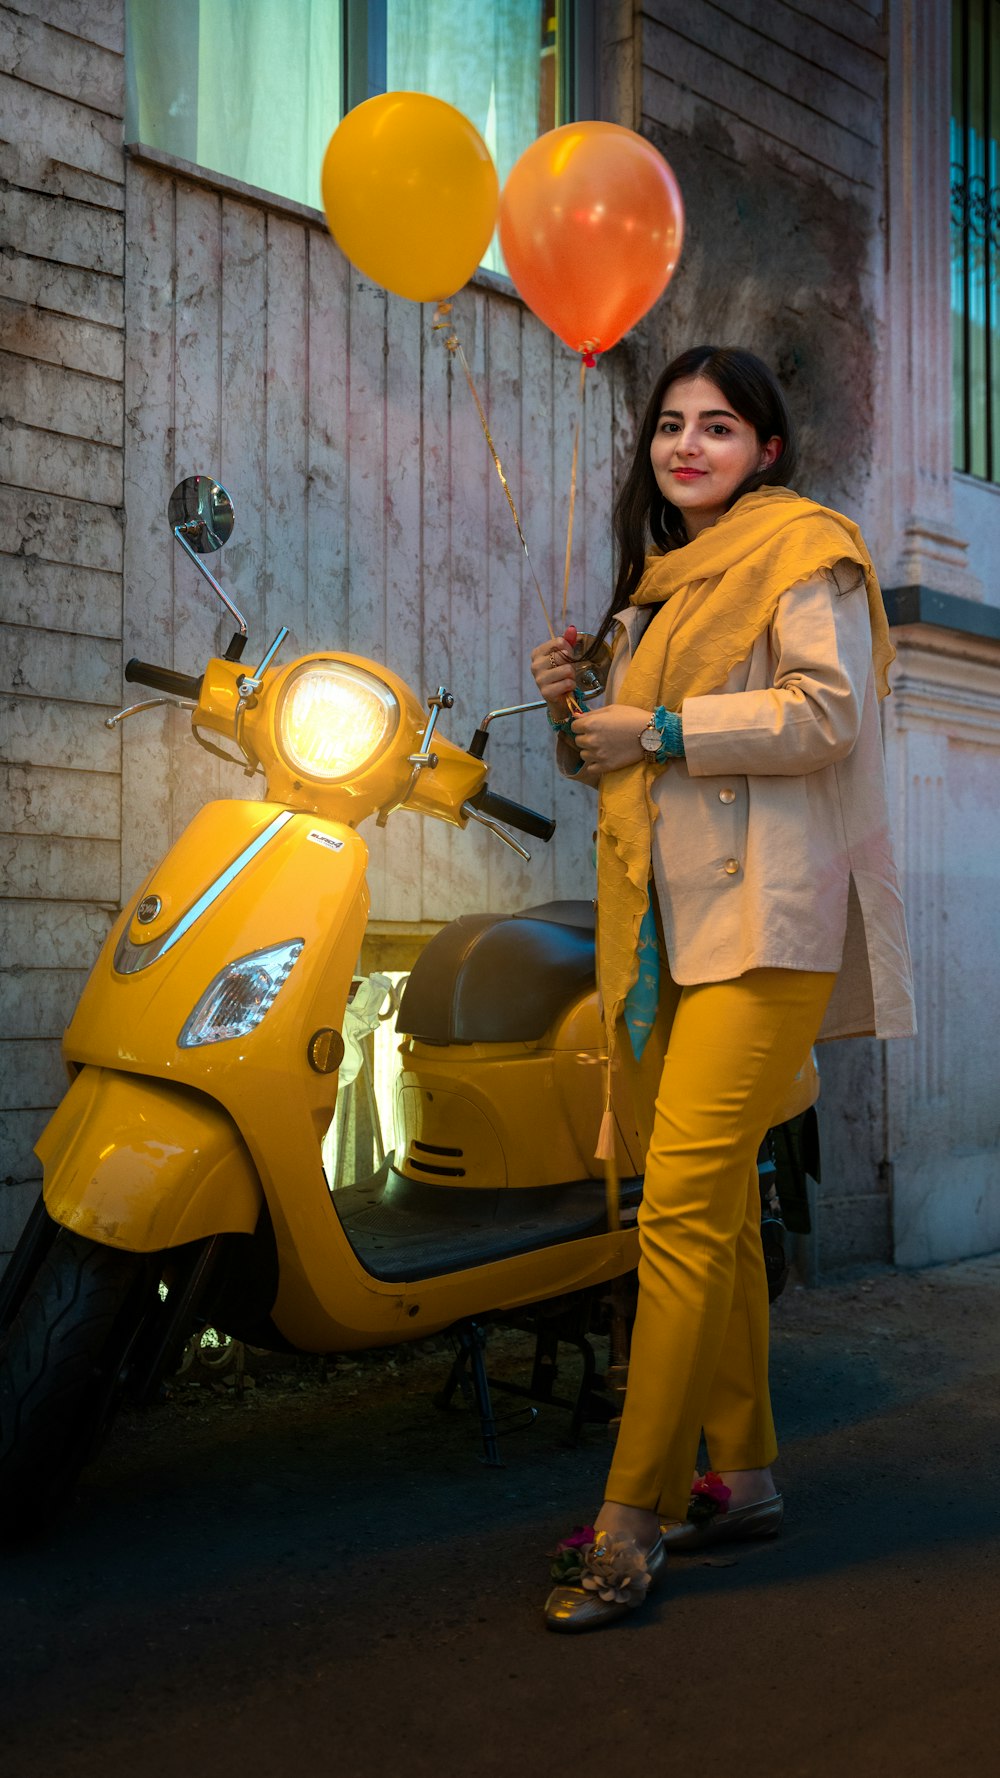 a person standing next to a yellow motorcycle with balloons